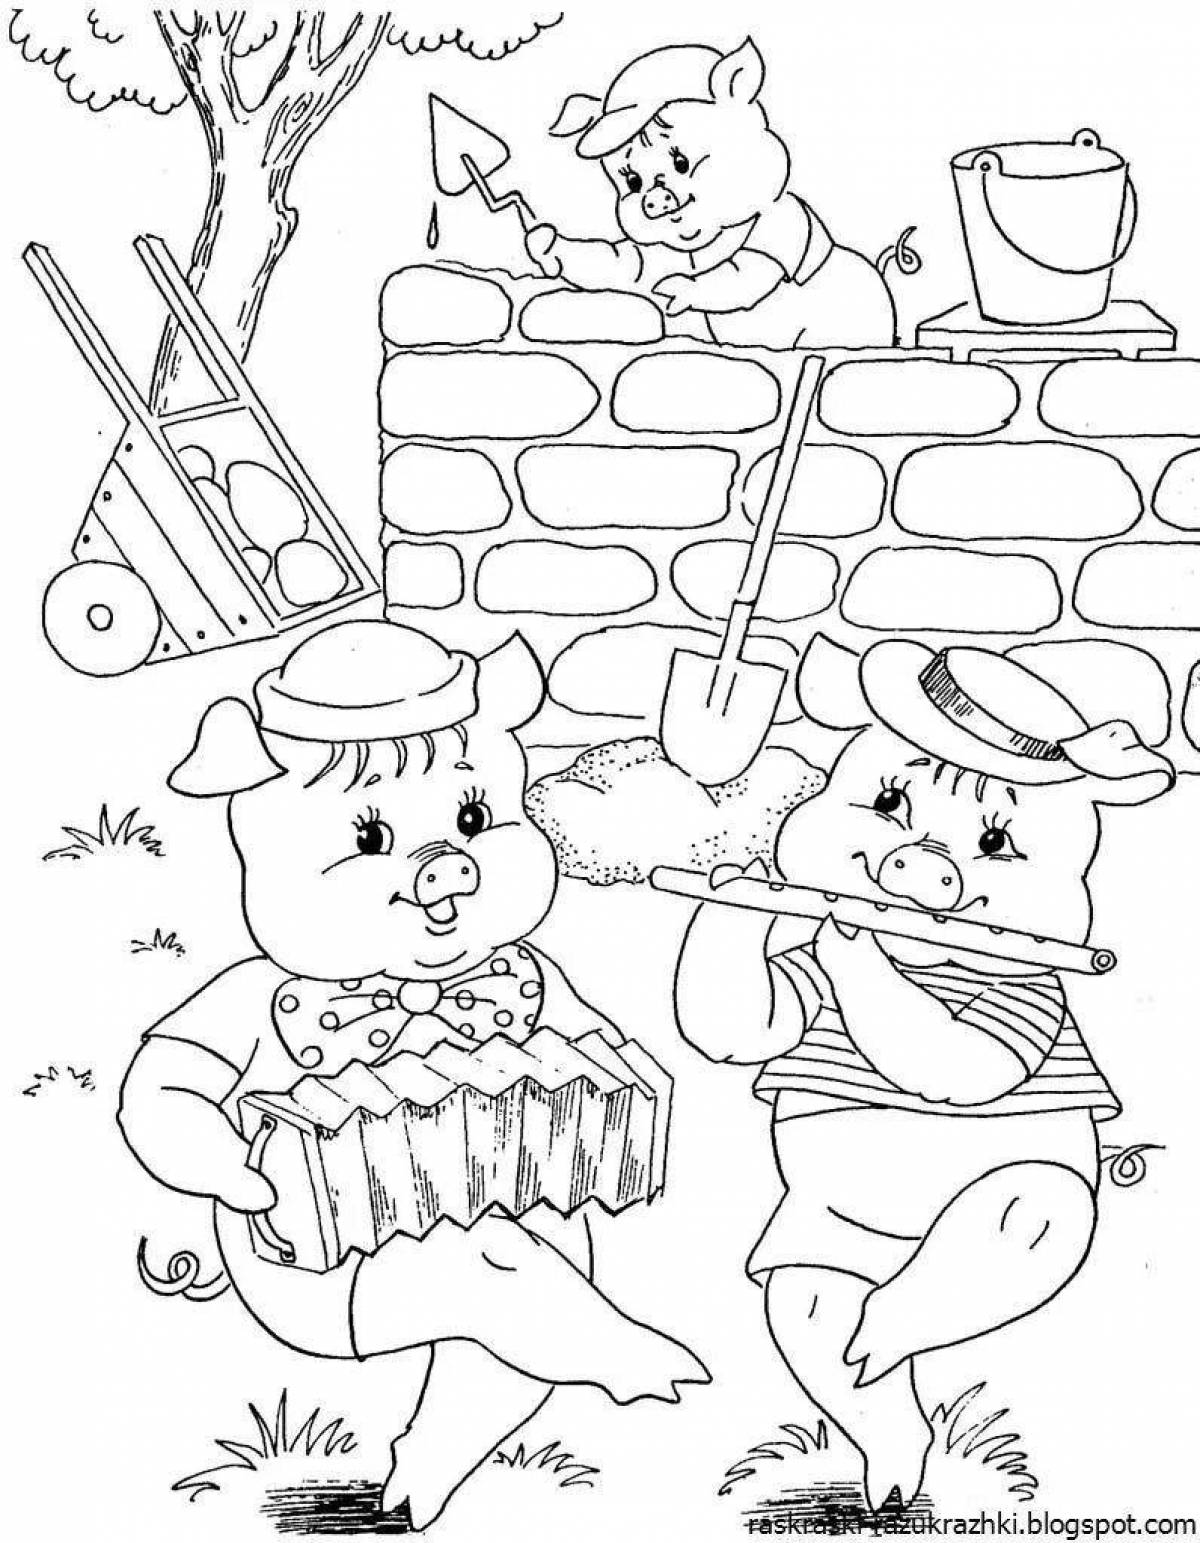 Three little pigs coloring pages for kids